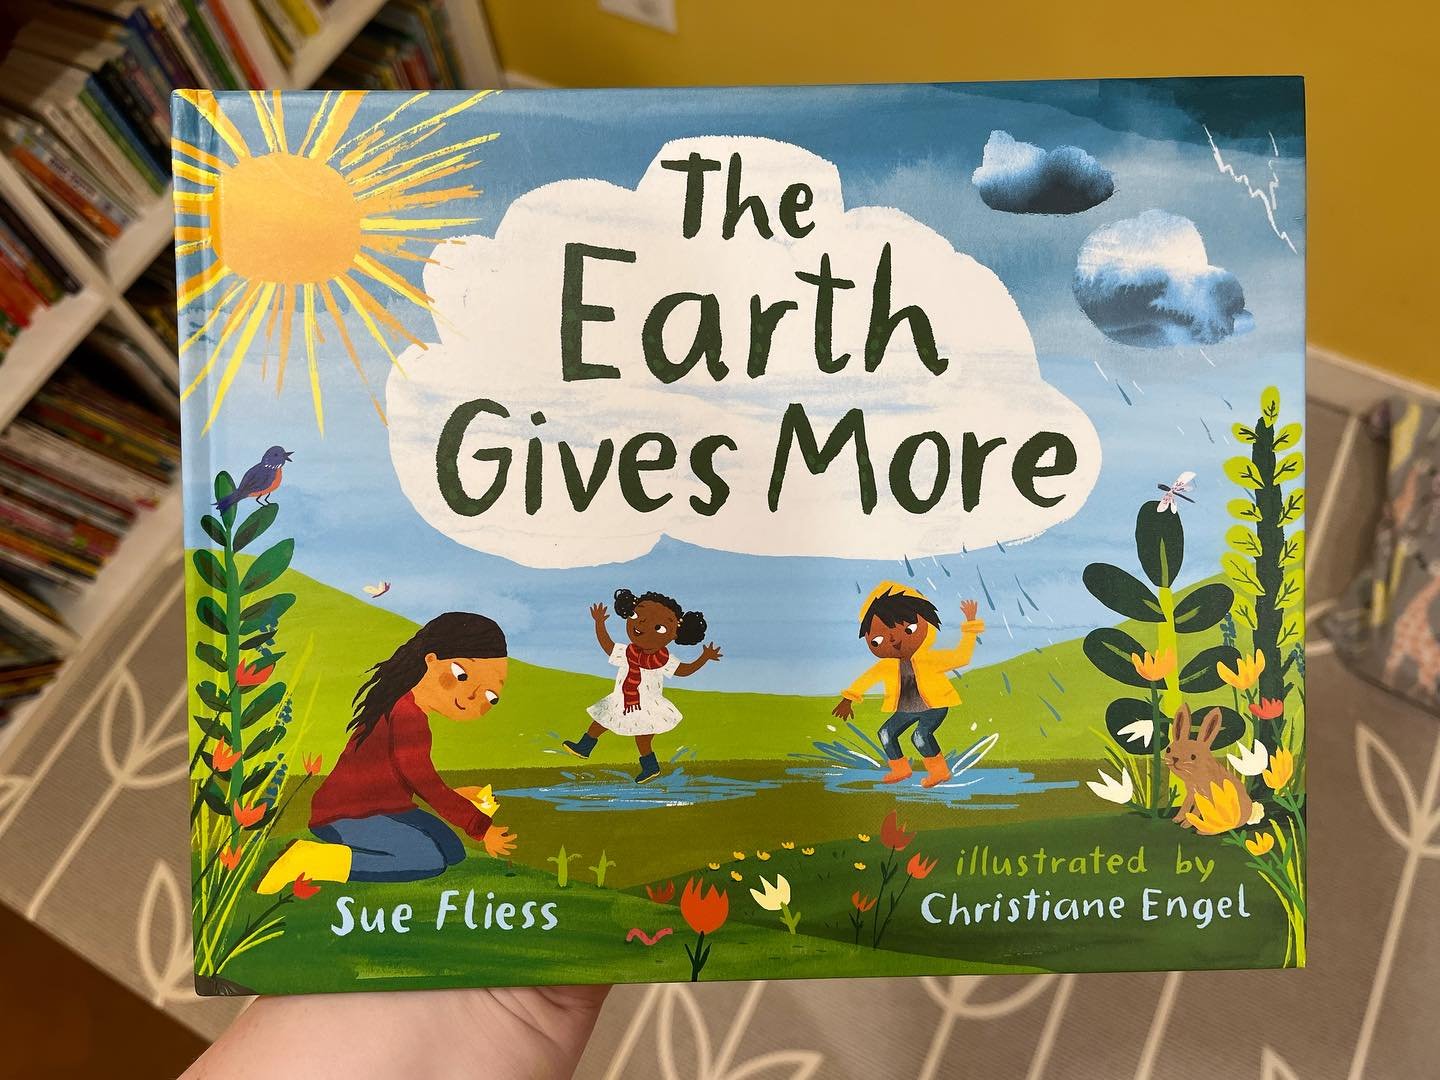 Happy Earth Week! Just one day isn&rsquo;t enough to celebrate our amazing planet so we devote a whole week! 🌎 🌍 🌏 Here are a few of the books we&rsquo;re reading this week. 

1. &ldquo;The Earth Gives More&rdquo; by Sue Fliess

2. &ldquo;Don&rsqu